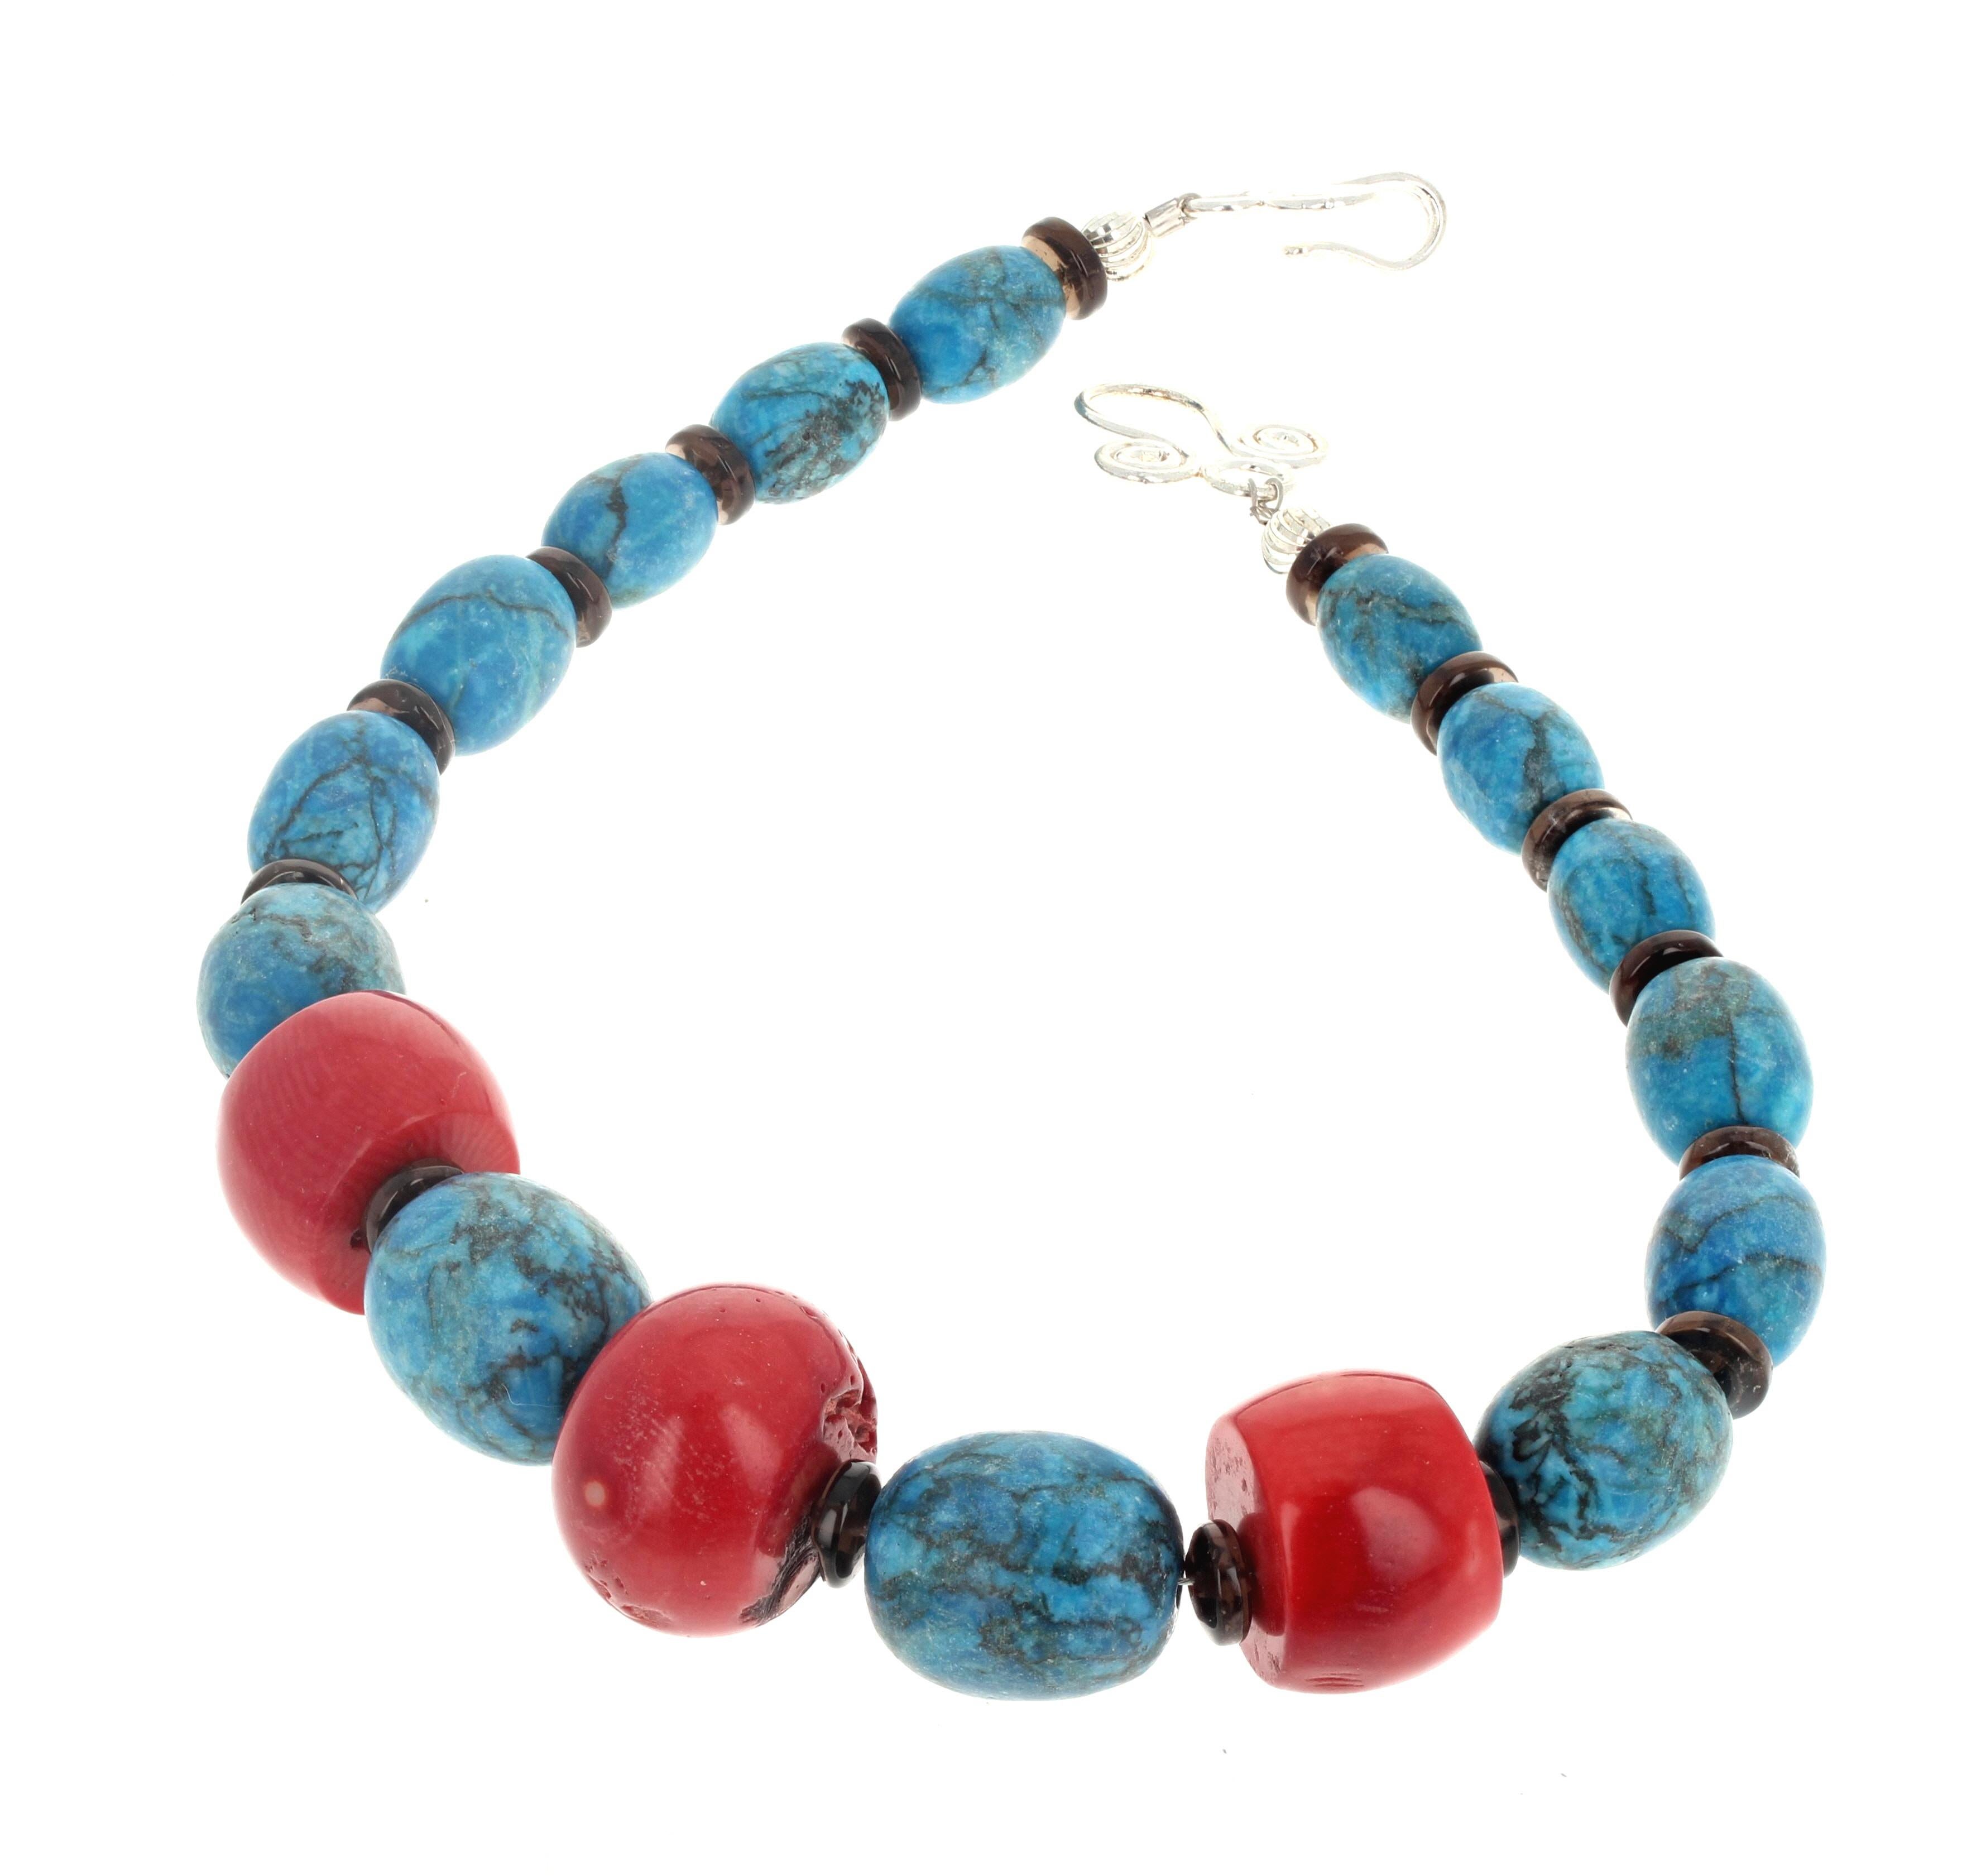 This is exactly 15 inches long with an easy to use silver hook clasp. The largest of these very blue realTurquoise are 20mm x 17mm.  The largest center natural real red Coral is 23 1/2mm x 14mm.  The gem cut and polished rondel spacers are Smoky